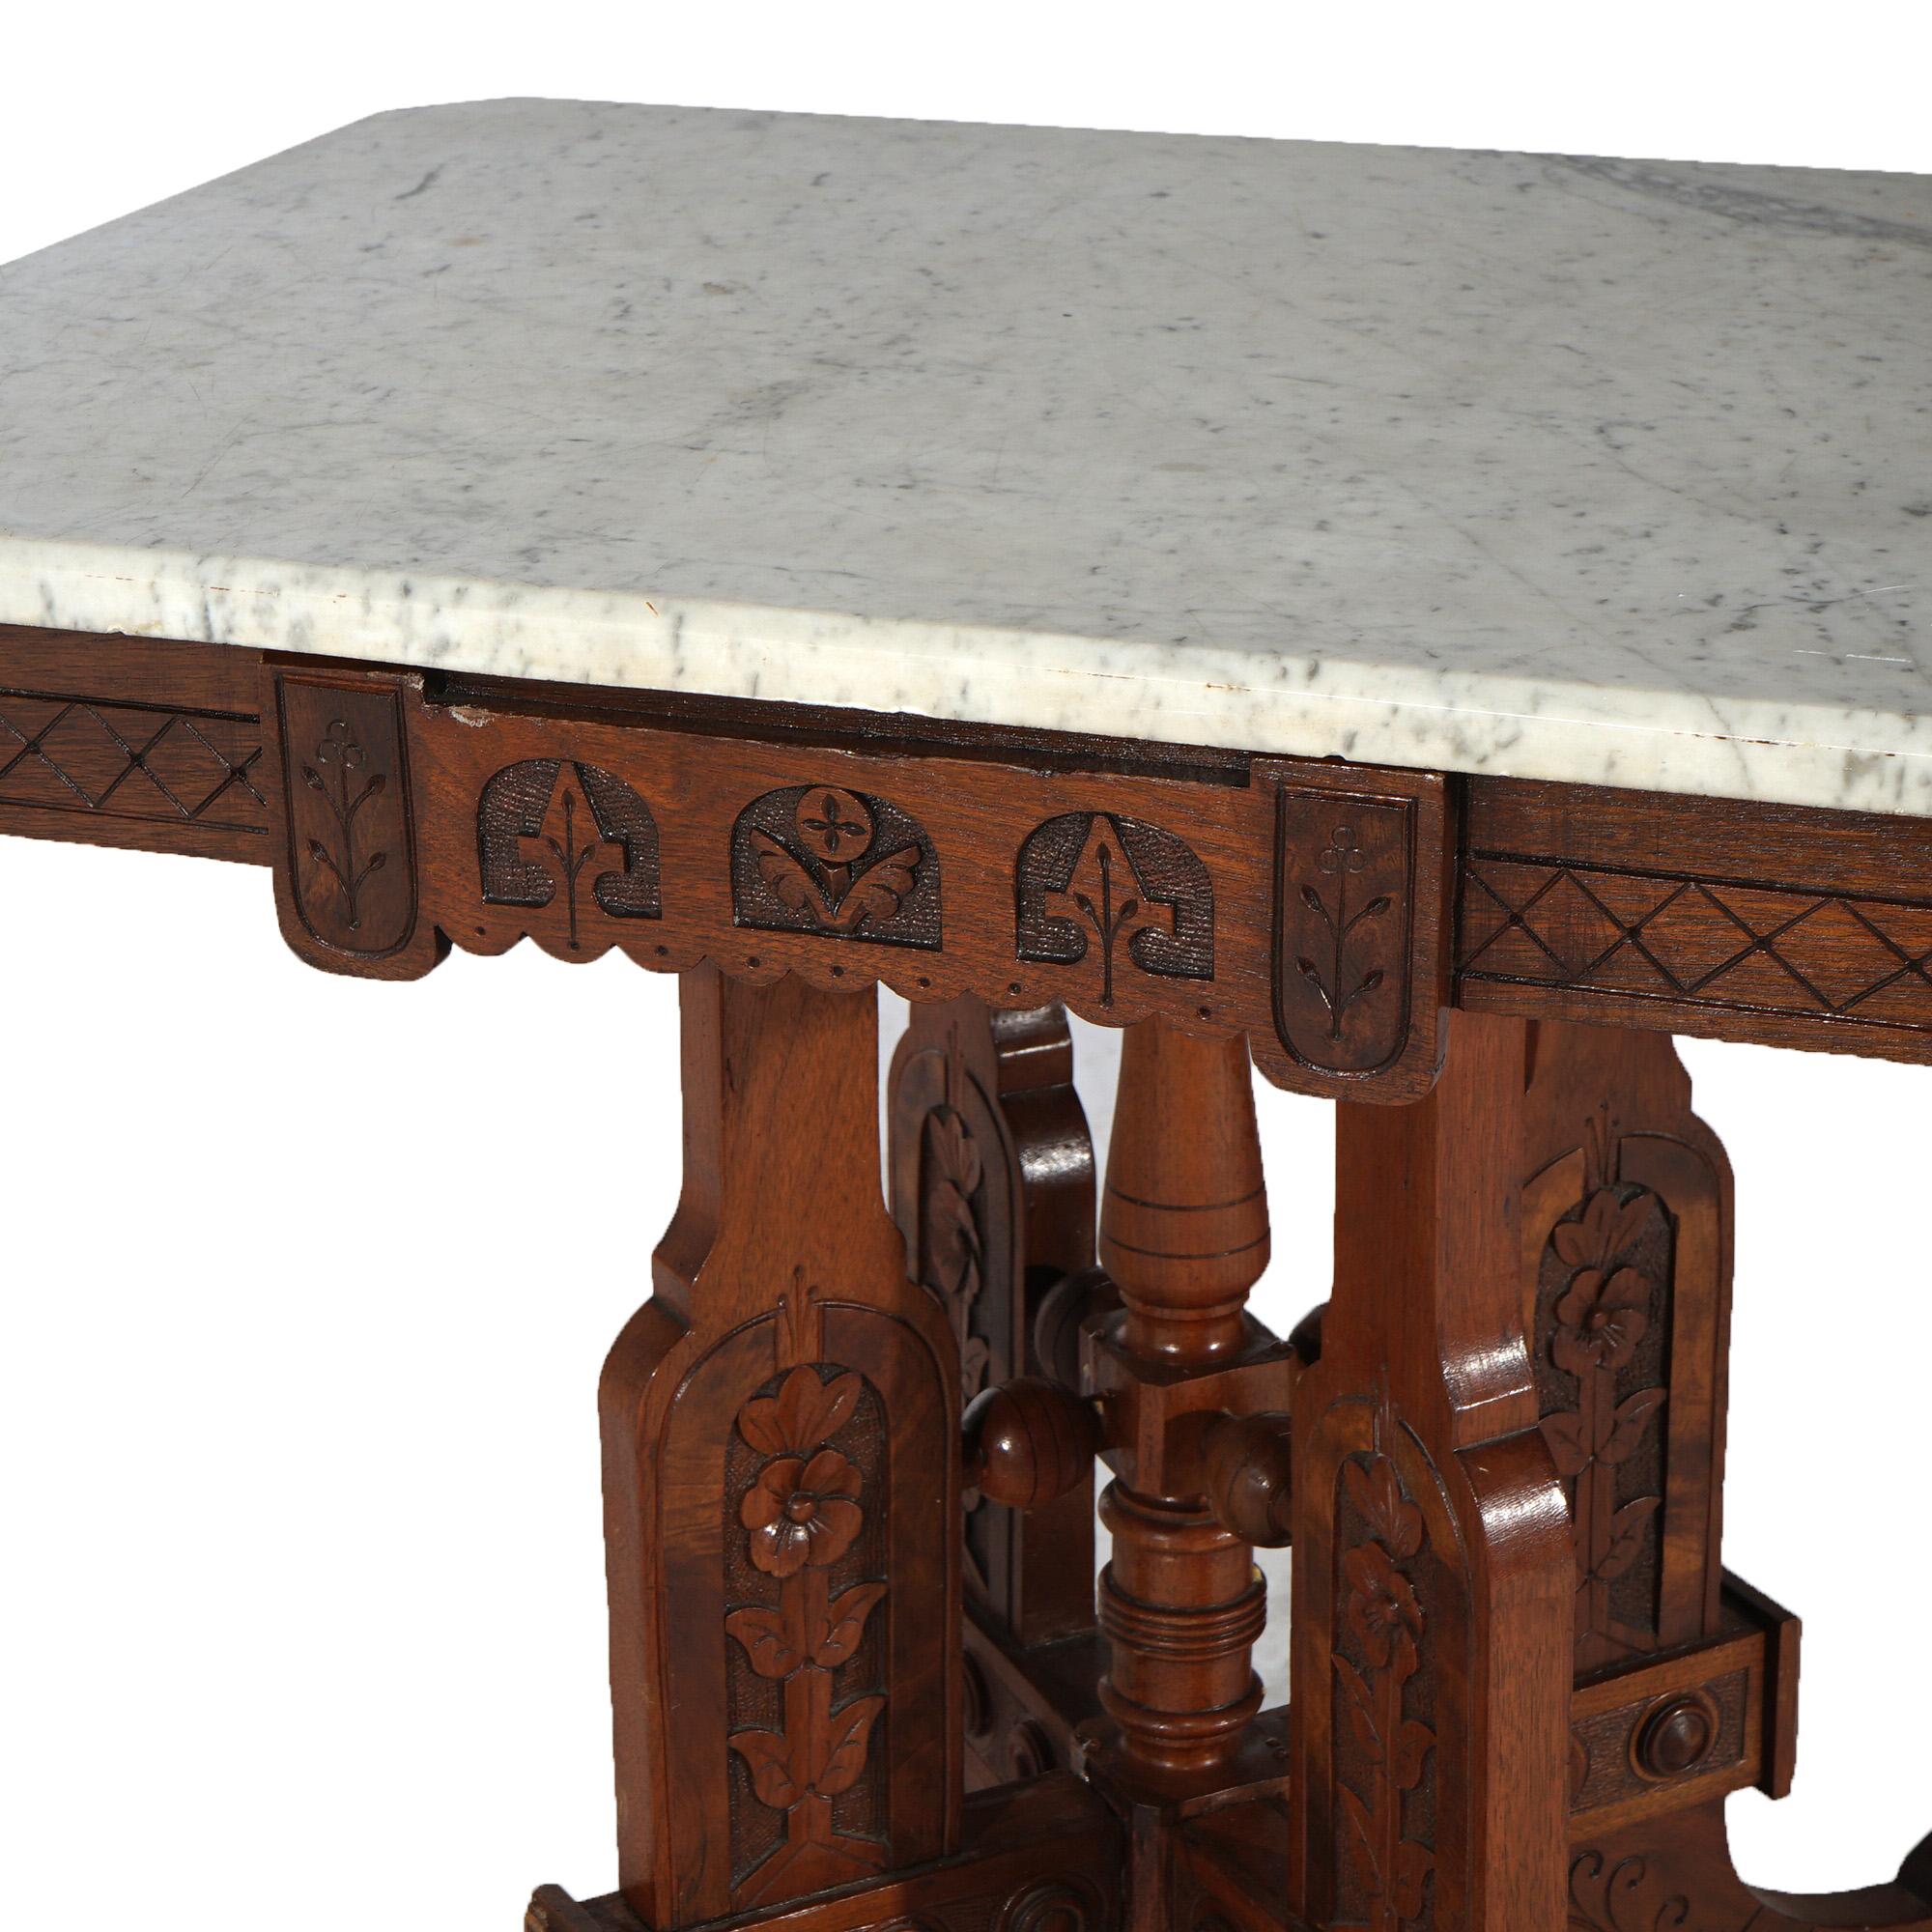 Antique Eastlake Aesthetic Floral Carved Walnut & Marble Parlor Table, c1880 For Sale 8